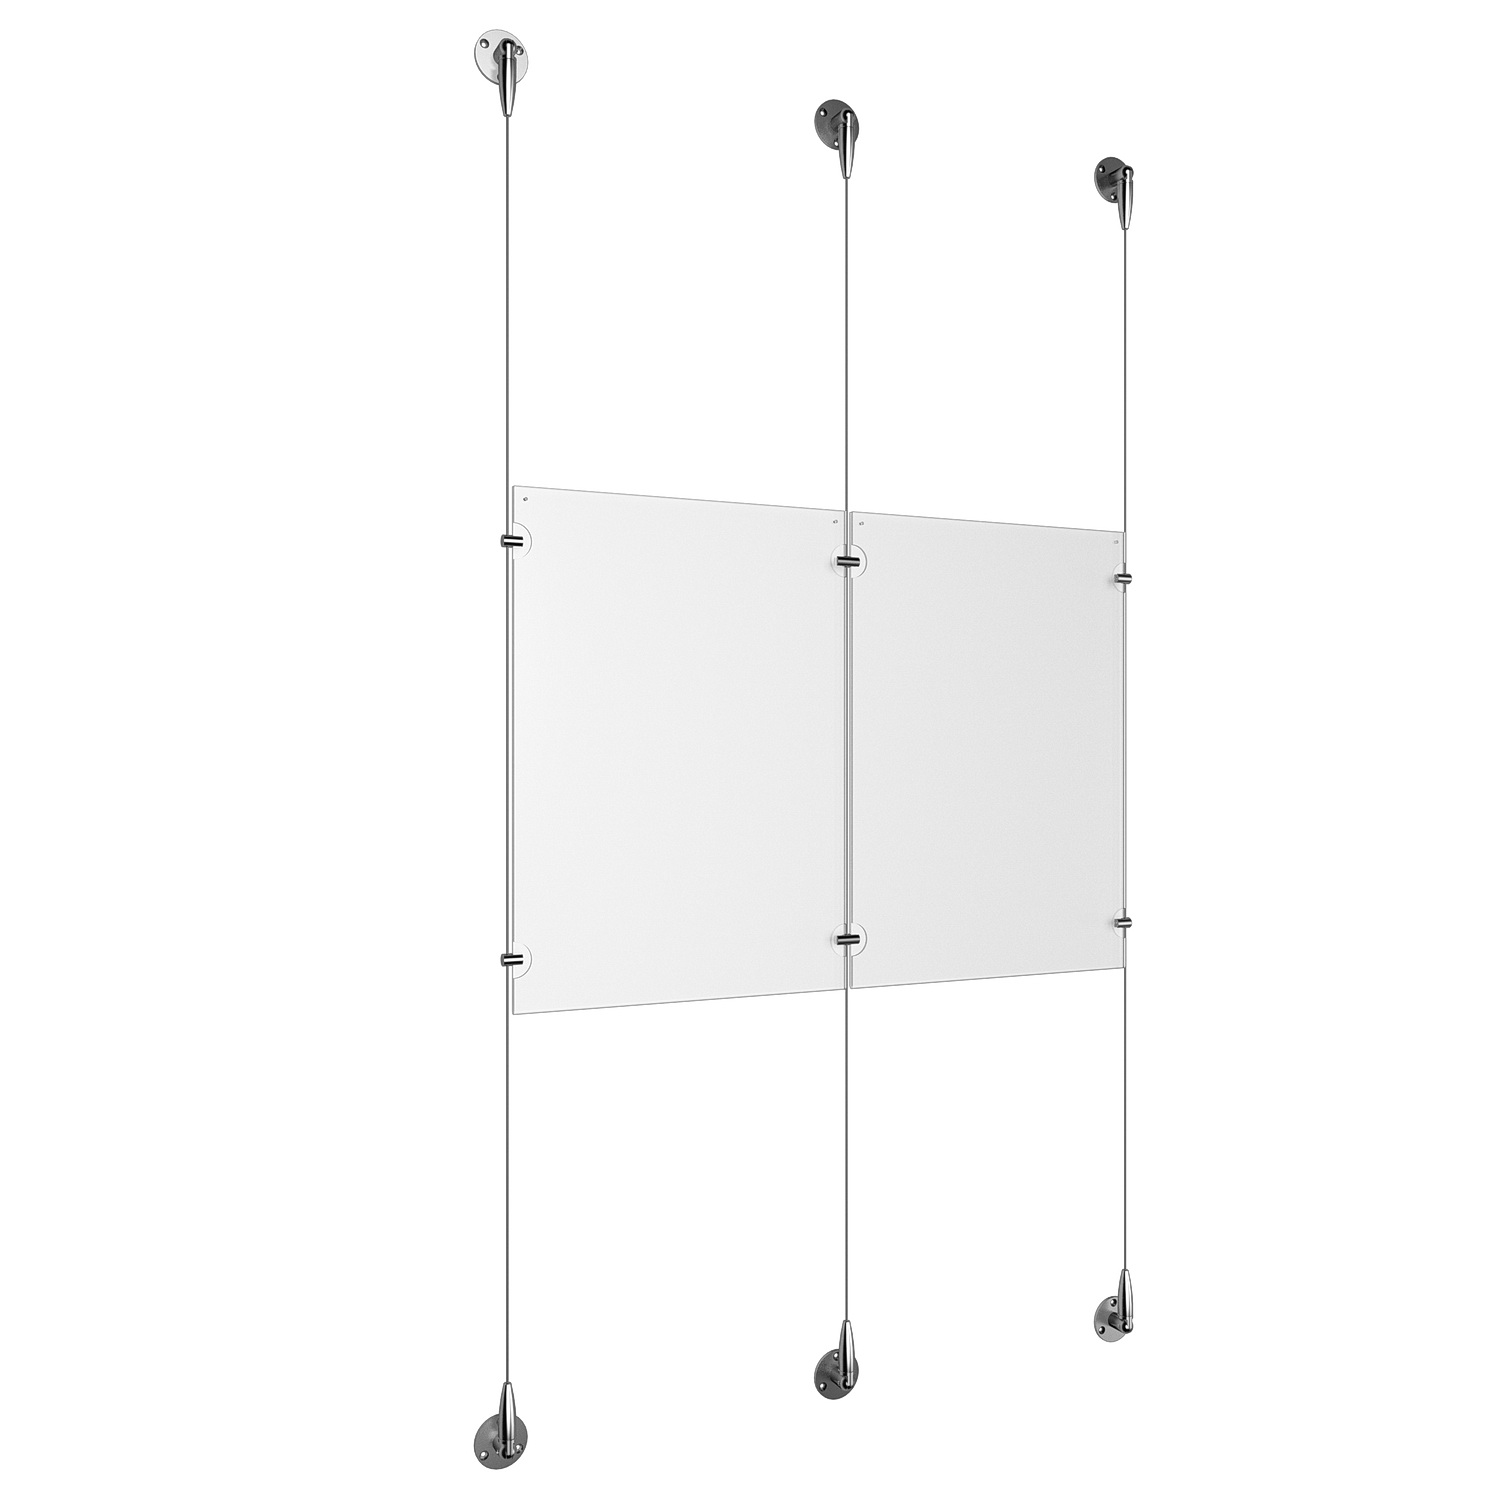 (2) 11'' Width x 17'' Height Clear Acrylic Frame & (3) Aluminum Chrome Polished Adjustable Angle Signature Cable Systems with (4) Single-Sided Panel Grippers (2) Double-Sided Panel Grippers